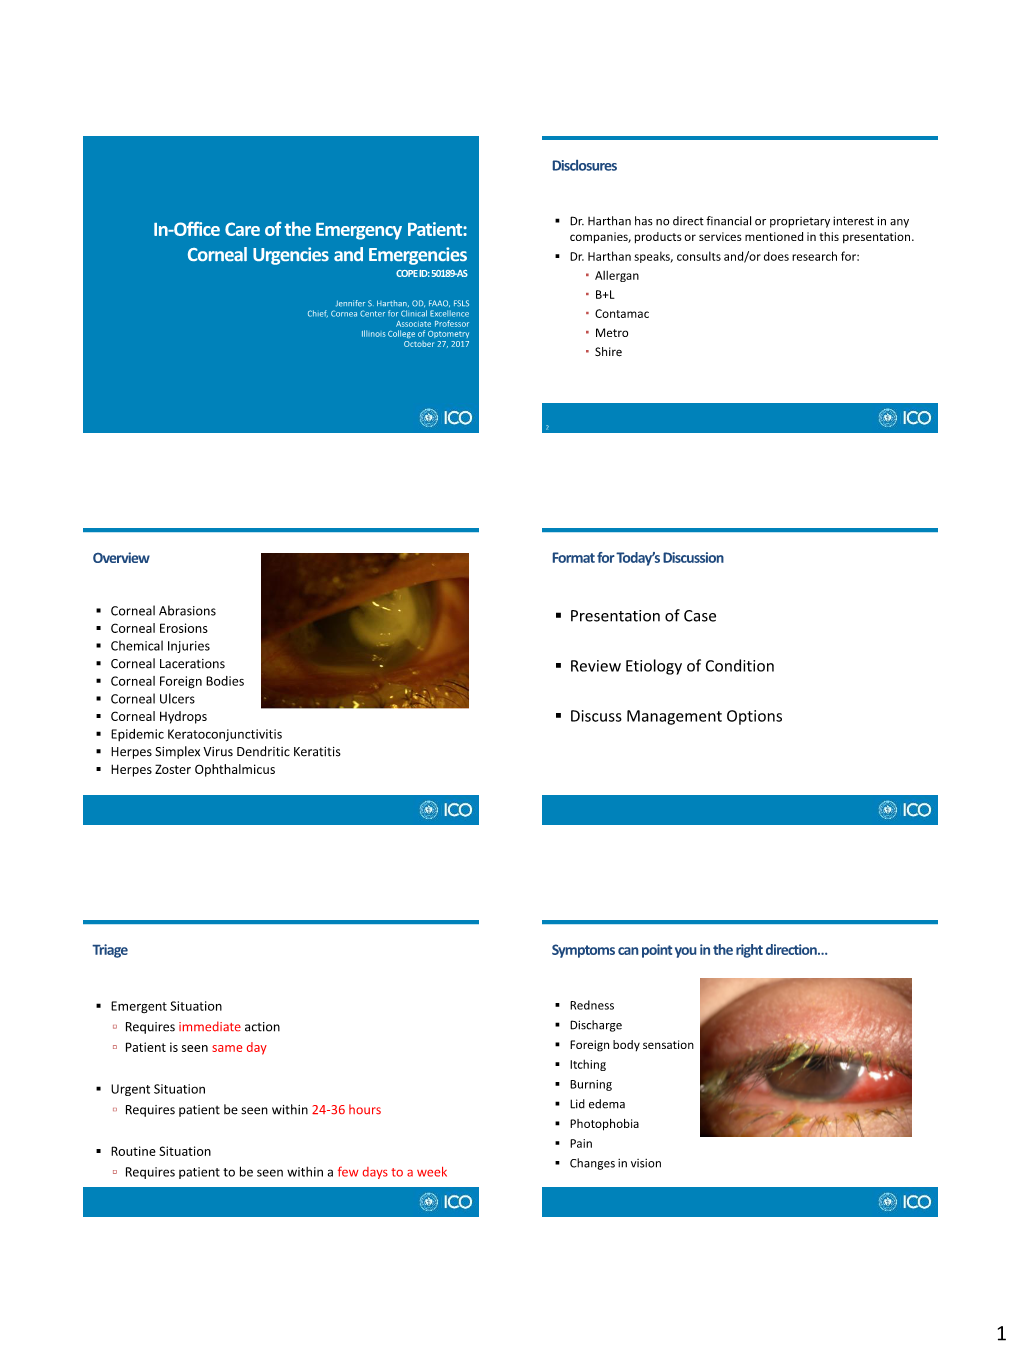 In-Office Care of the Emergency Patient: Corneal Urgencies And